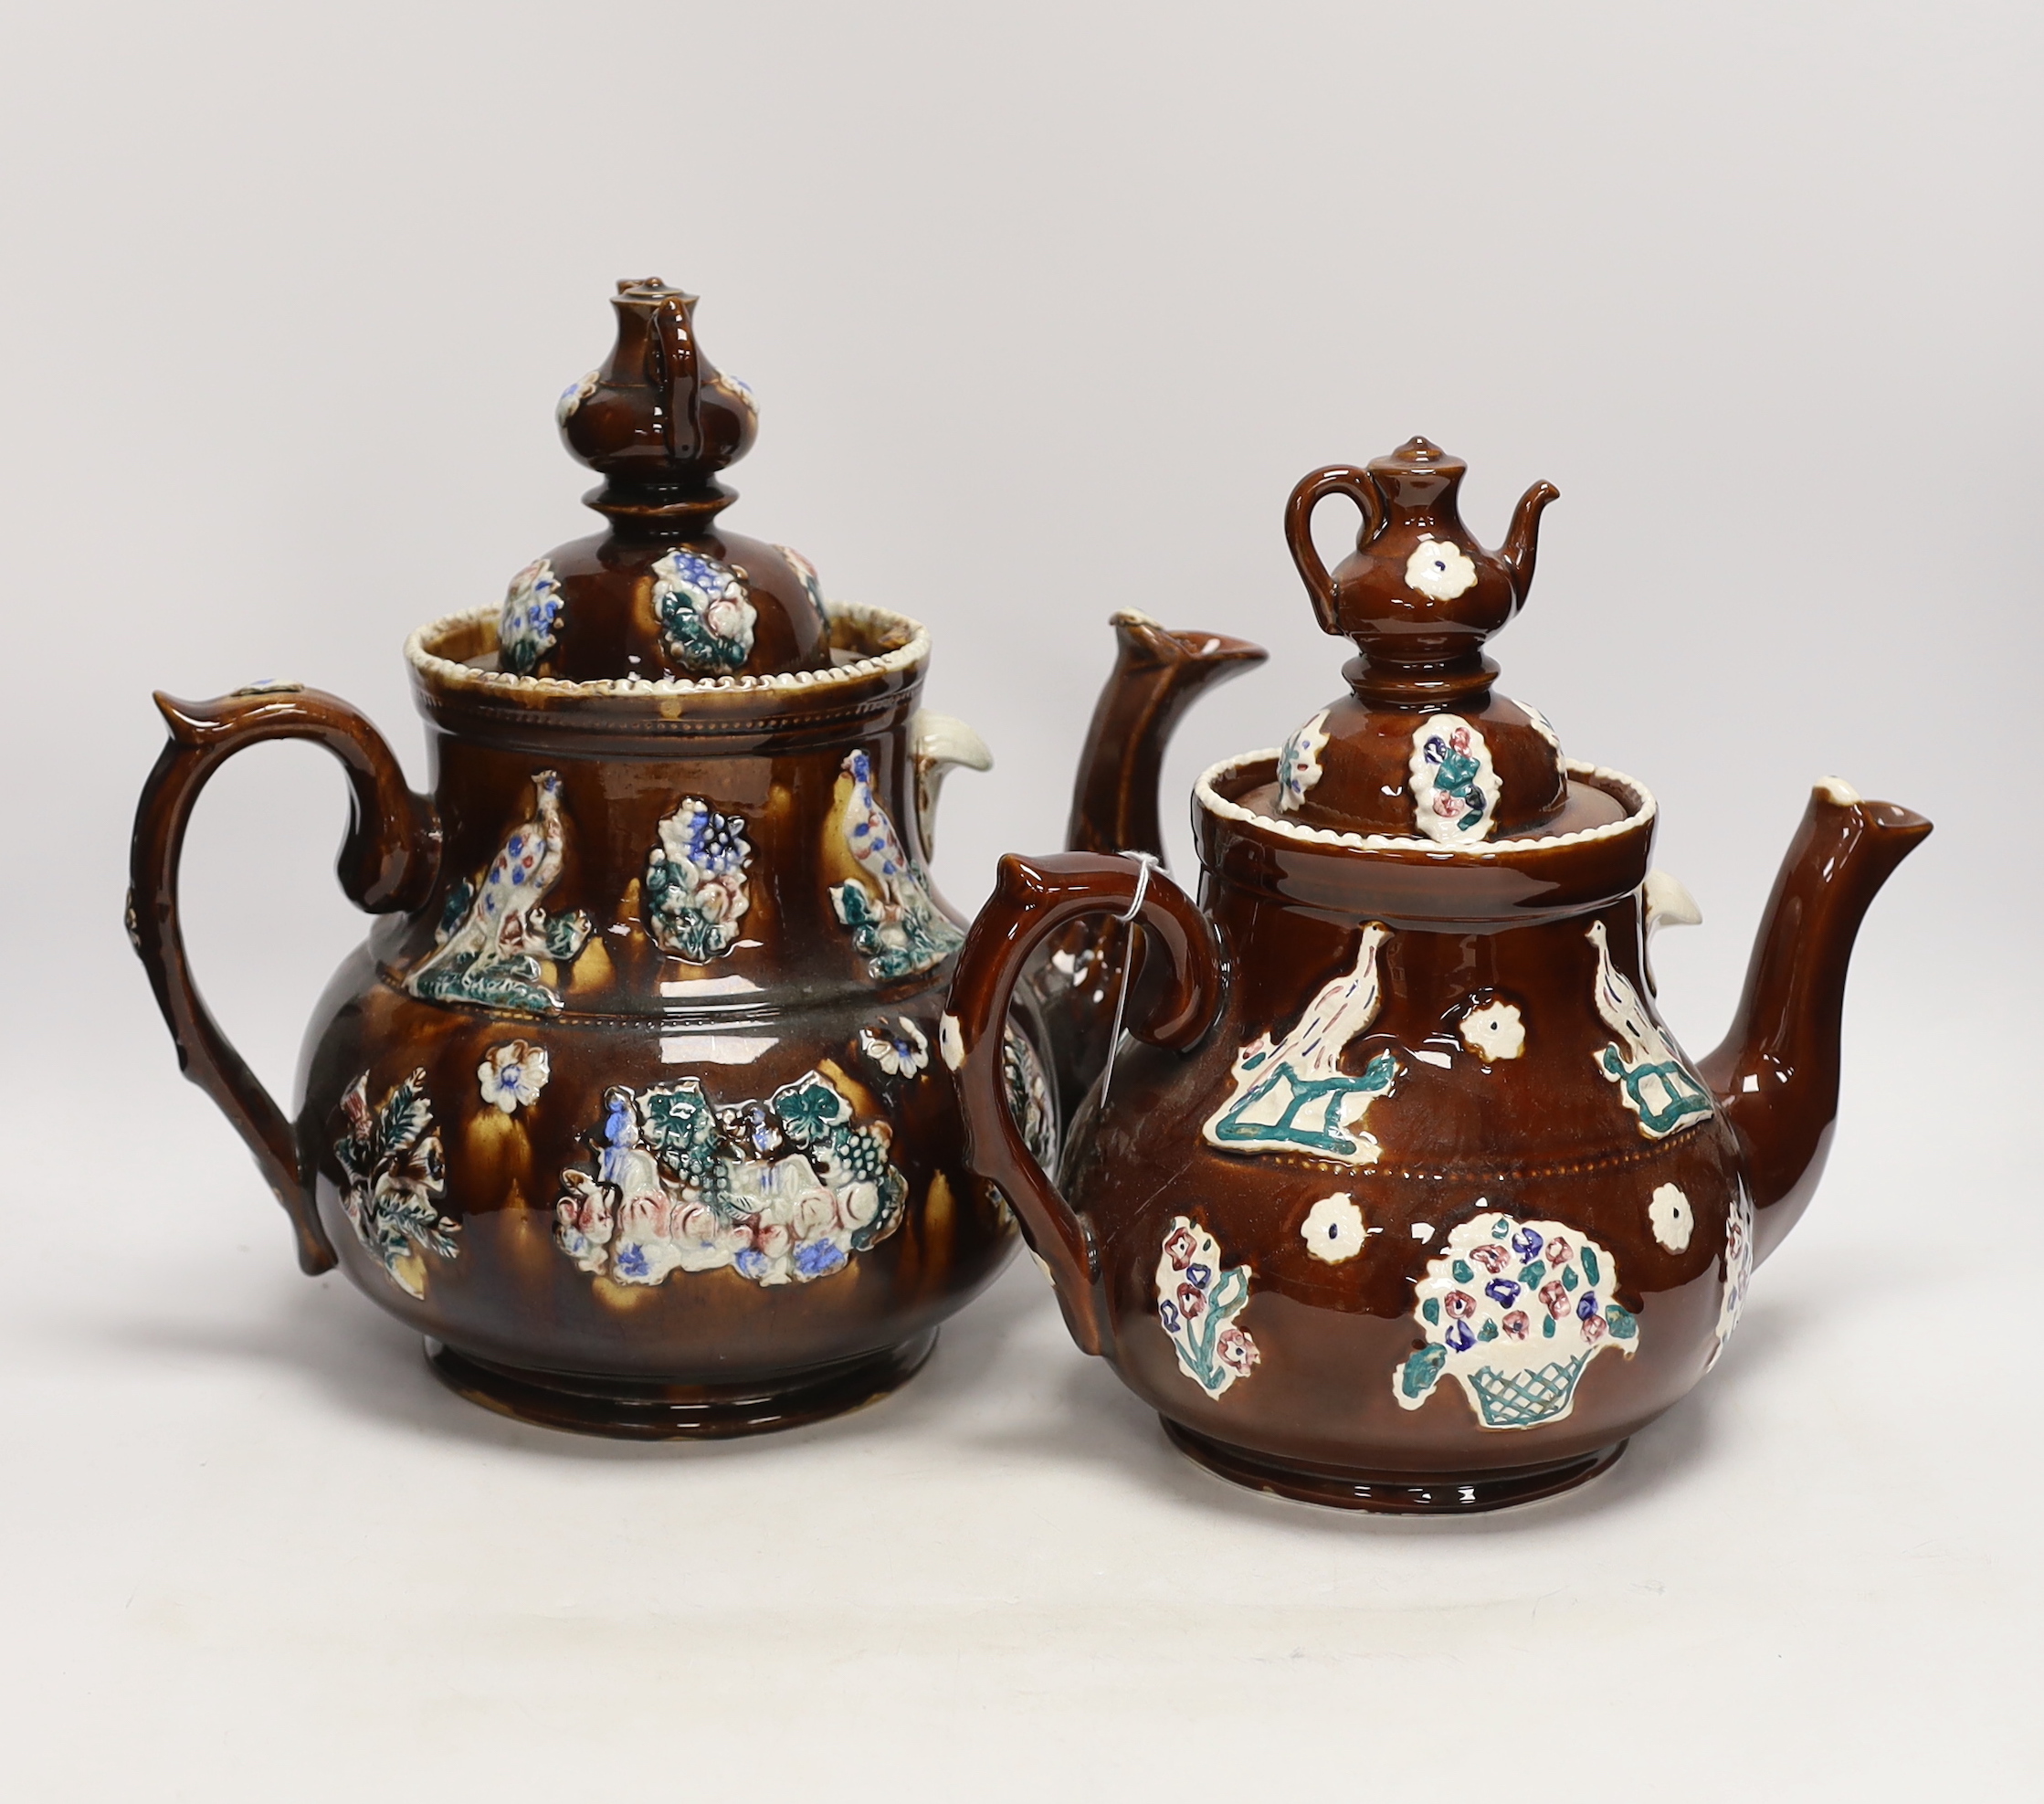 A late 19th century Measham barge ware teapot and cover, 31.5cm high, together with a reproduction teapot in the same style